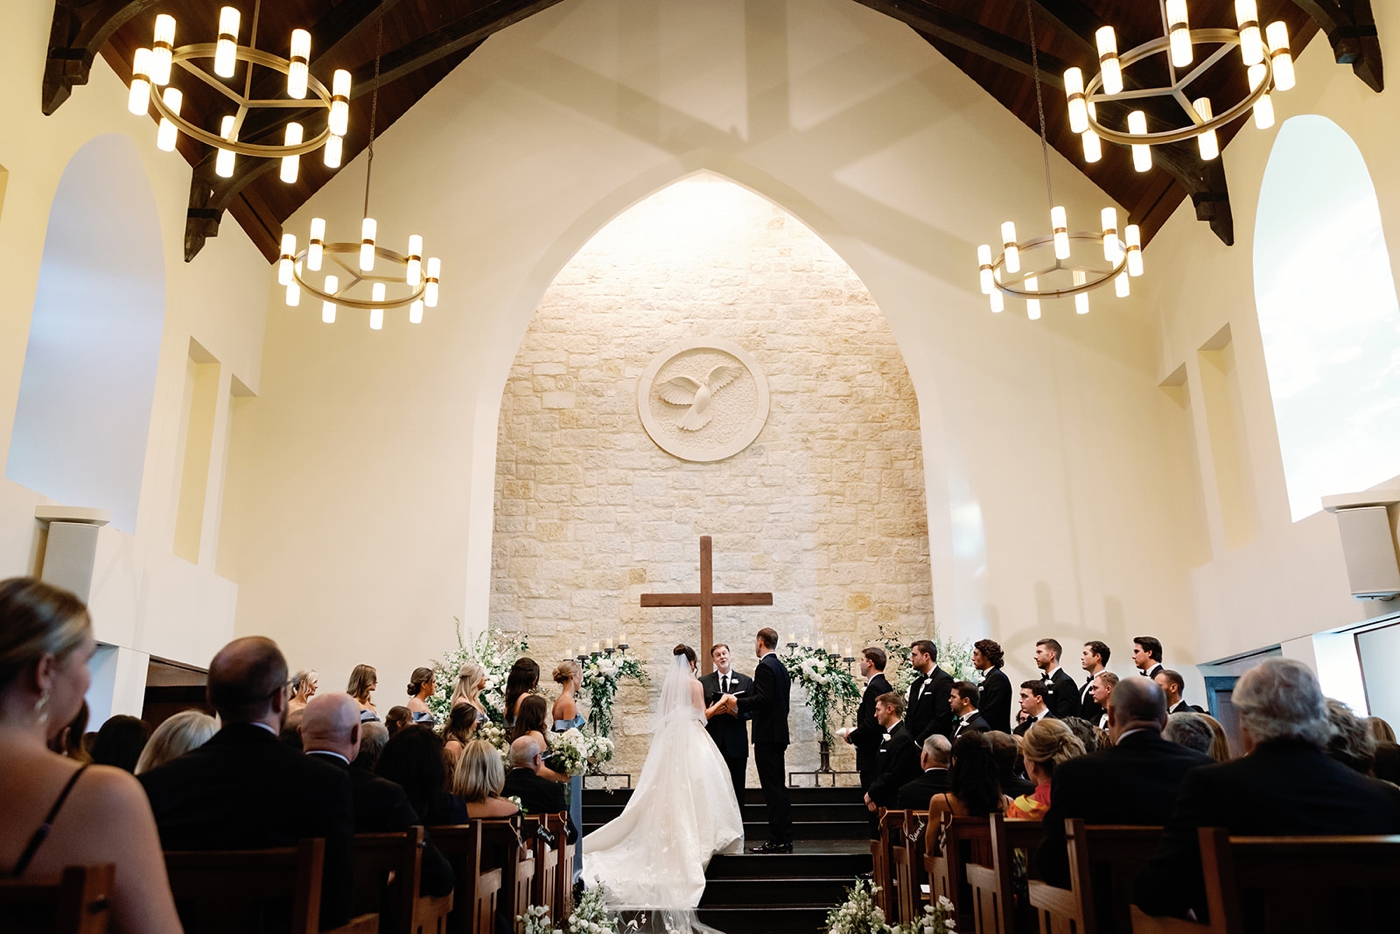 Wedding ceremony in the Smith Family Chapel at Riverbend Church in Austin, TX